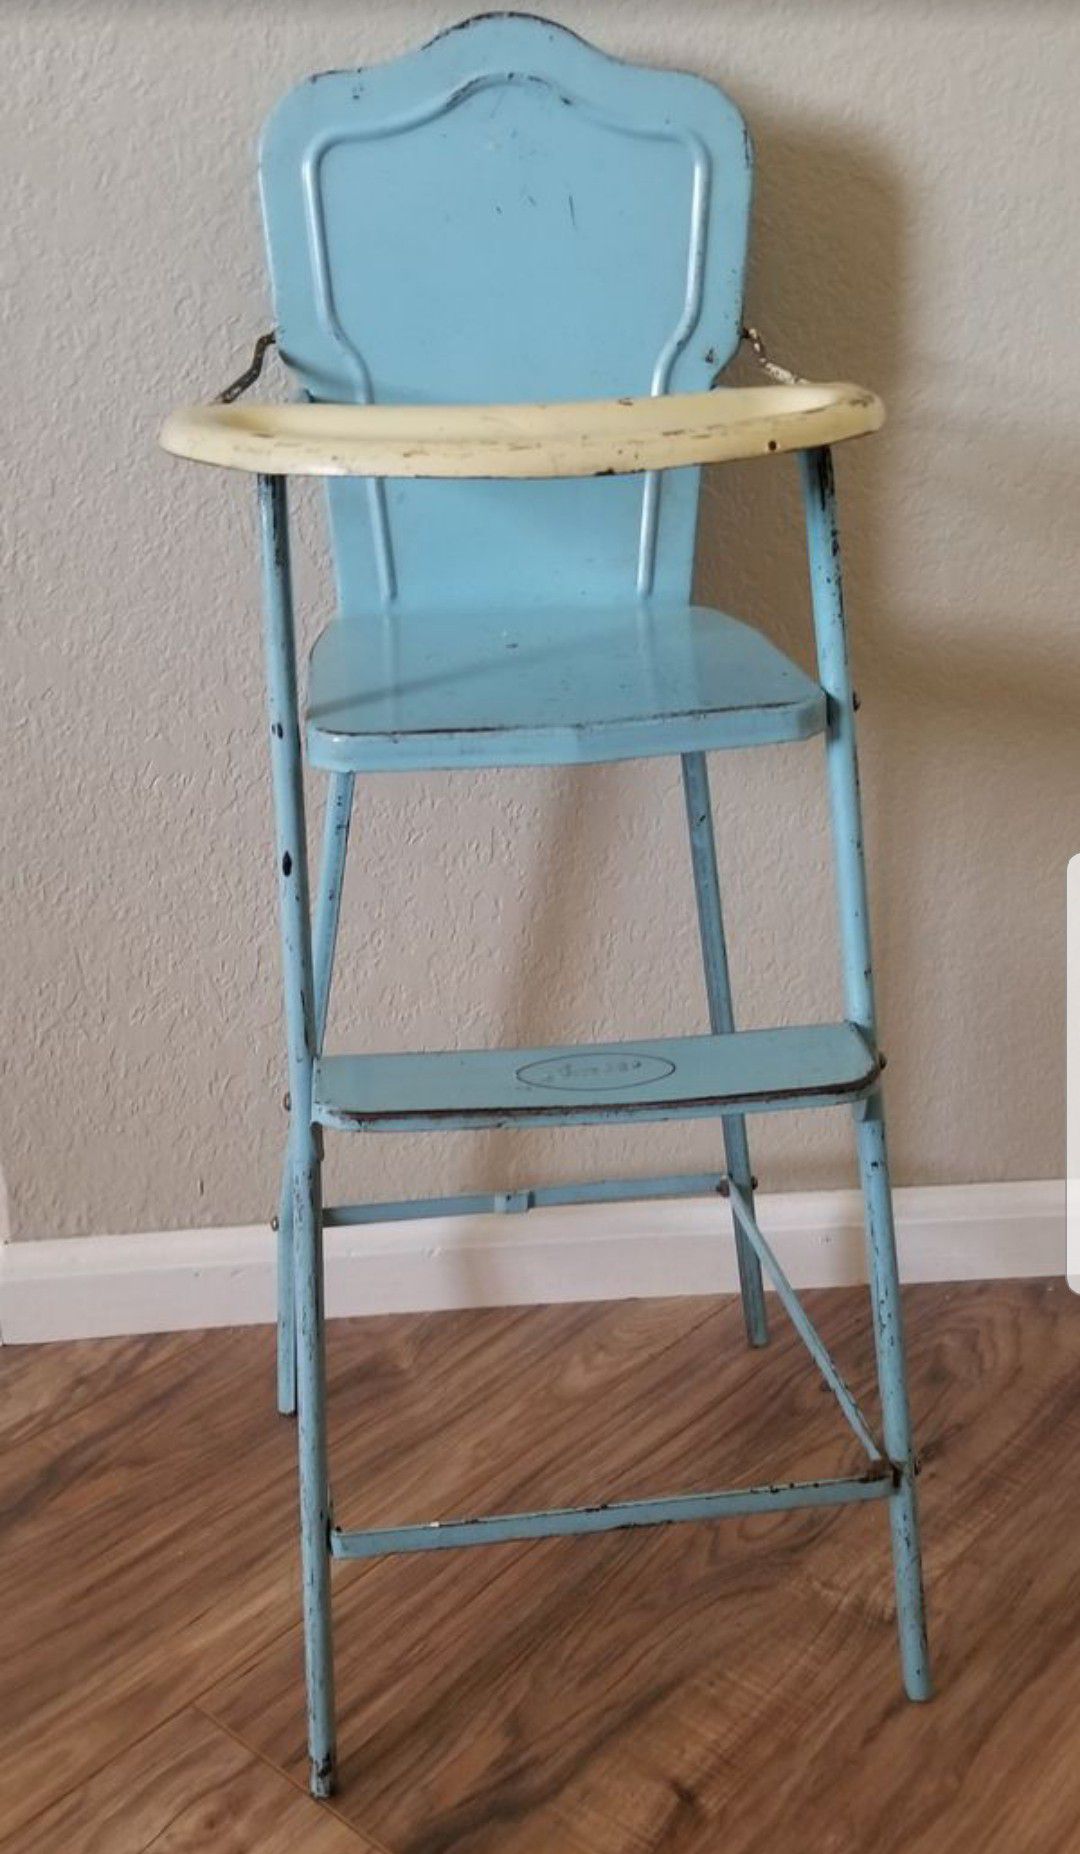 Antique baby doll high chair